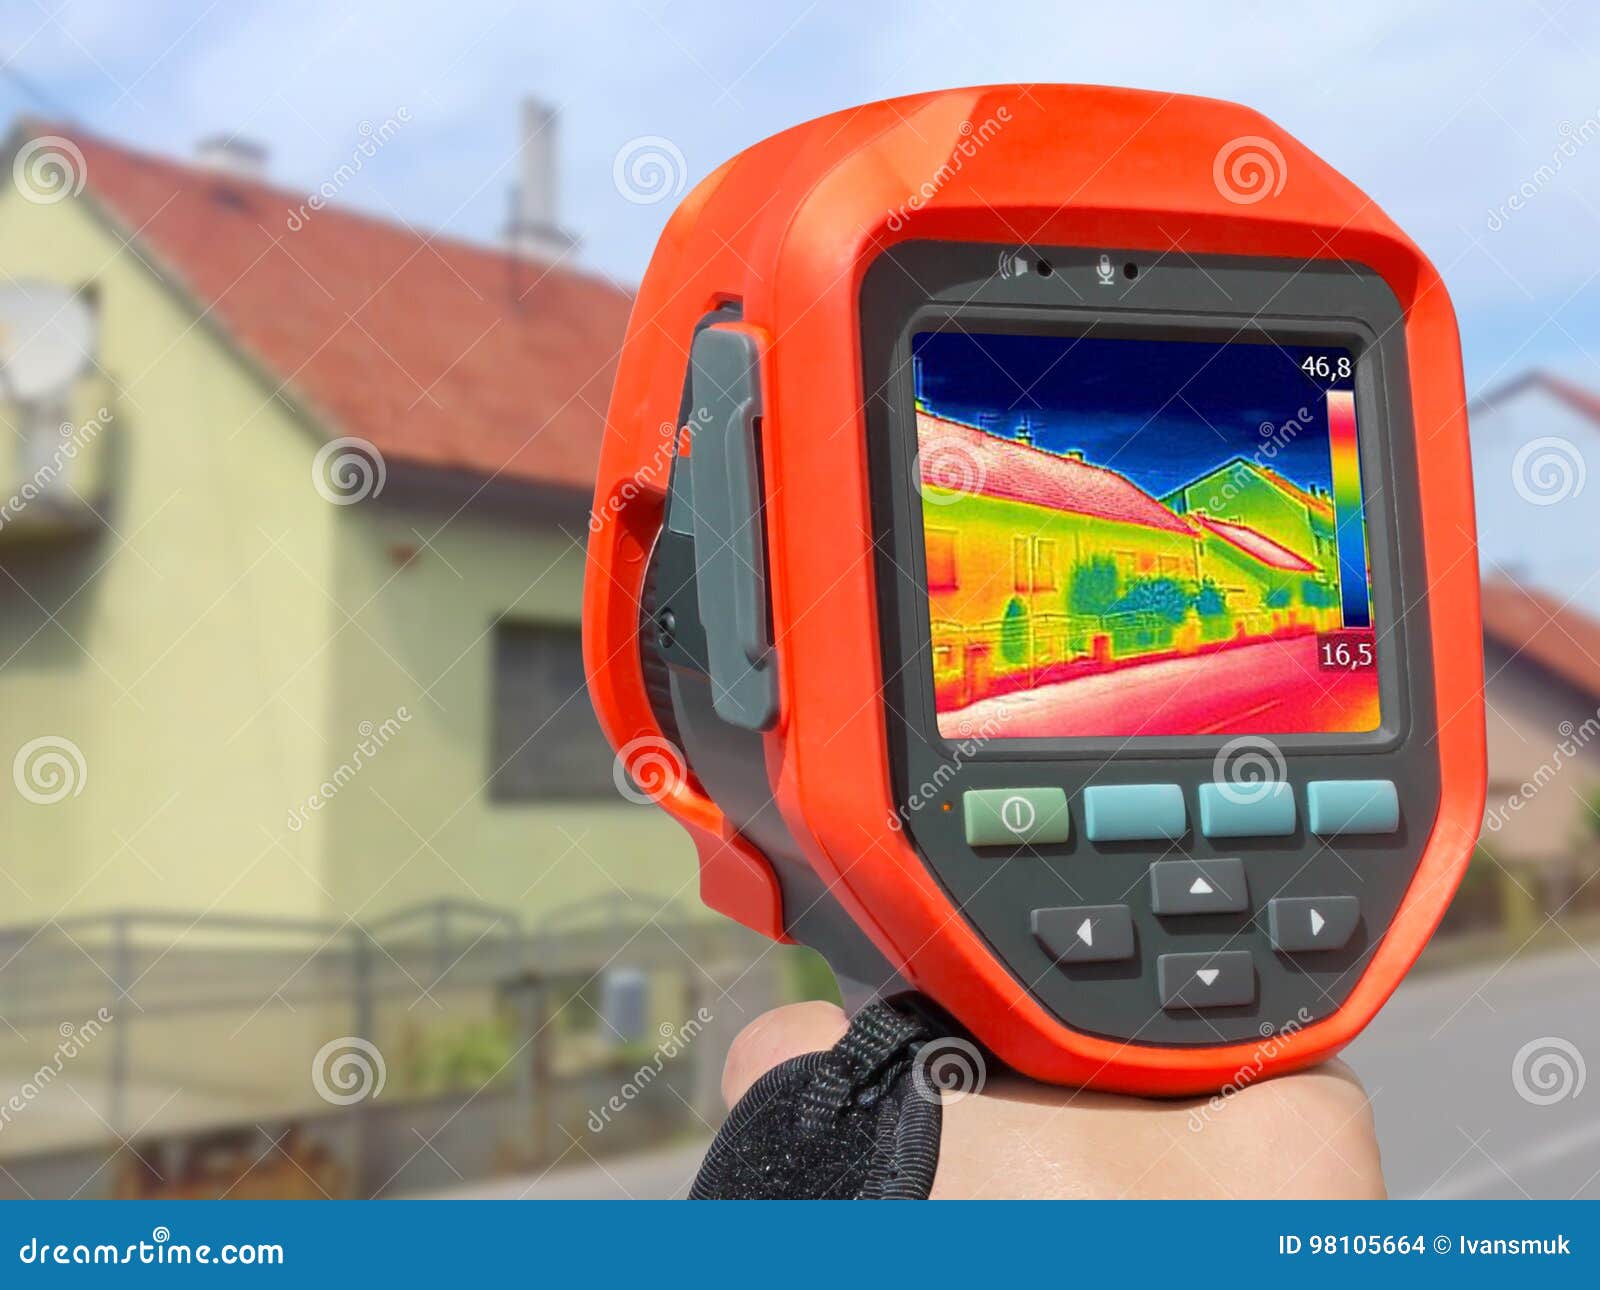 https://thumbs.dreamstime.com/z/recording-house-infrared-thermal-camera-heat-loss-98105664.jpg